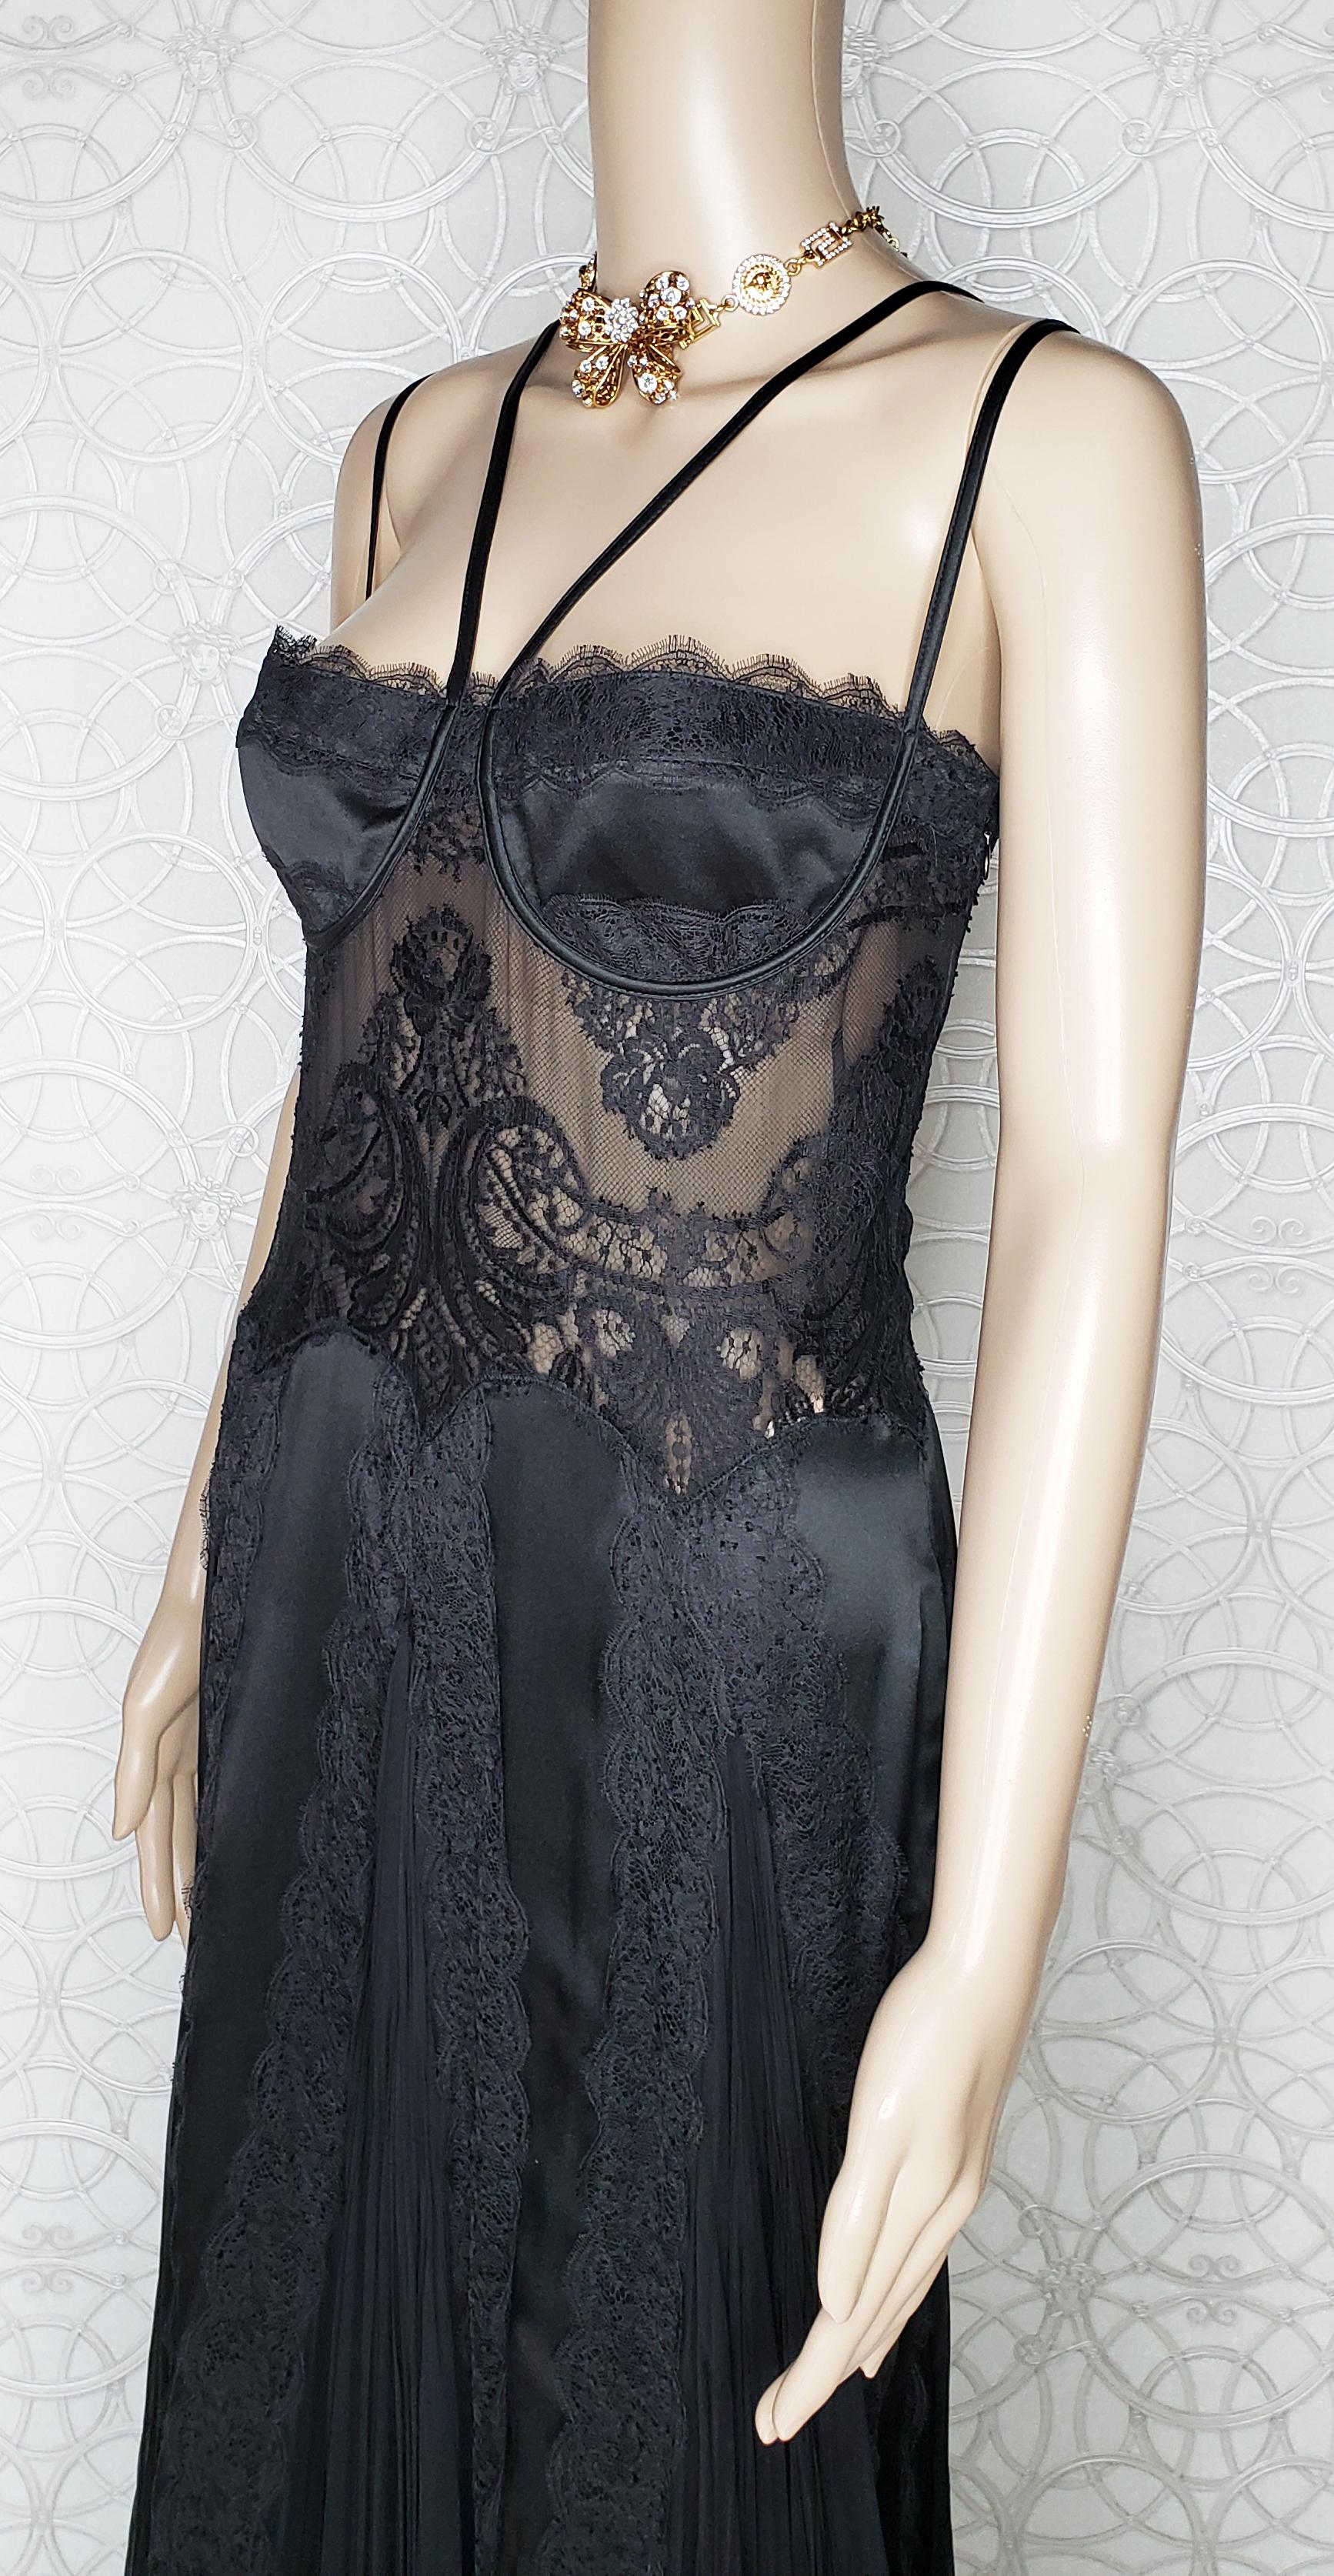 Fall 2003/2004 VINTAGE VERSACE BLACK SILK DRESS GOWN W/SHEER LACE Bodice  For Sale 5